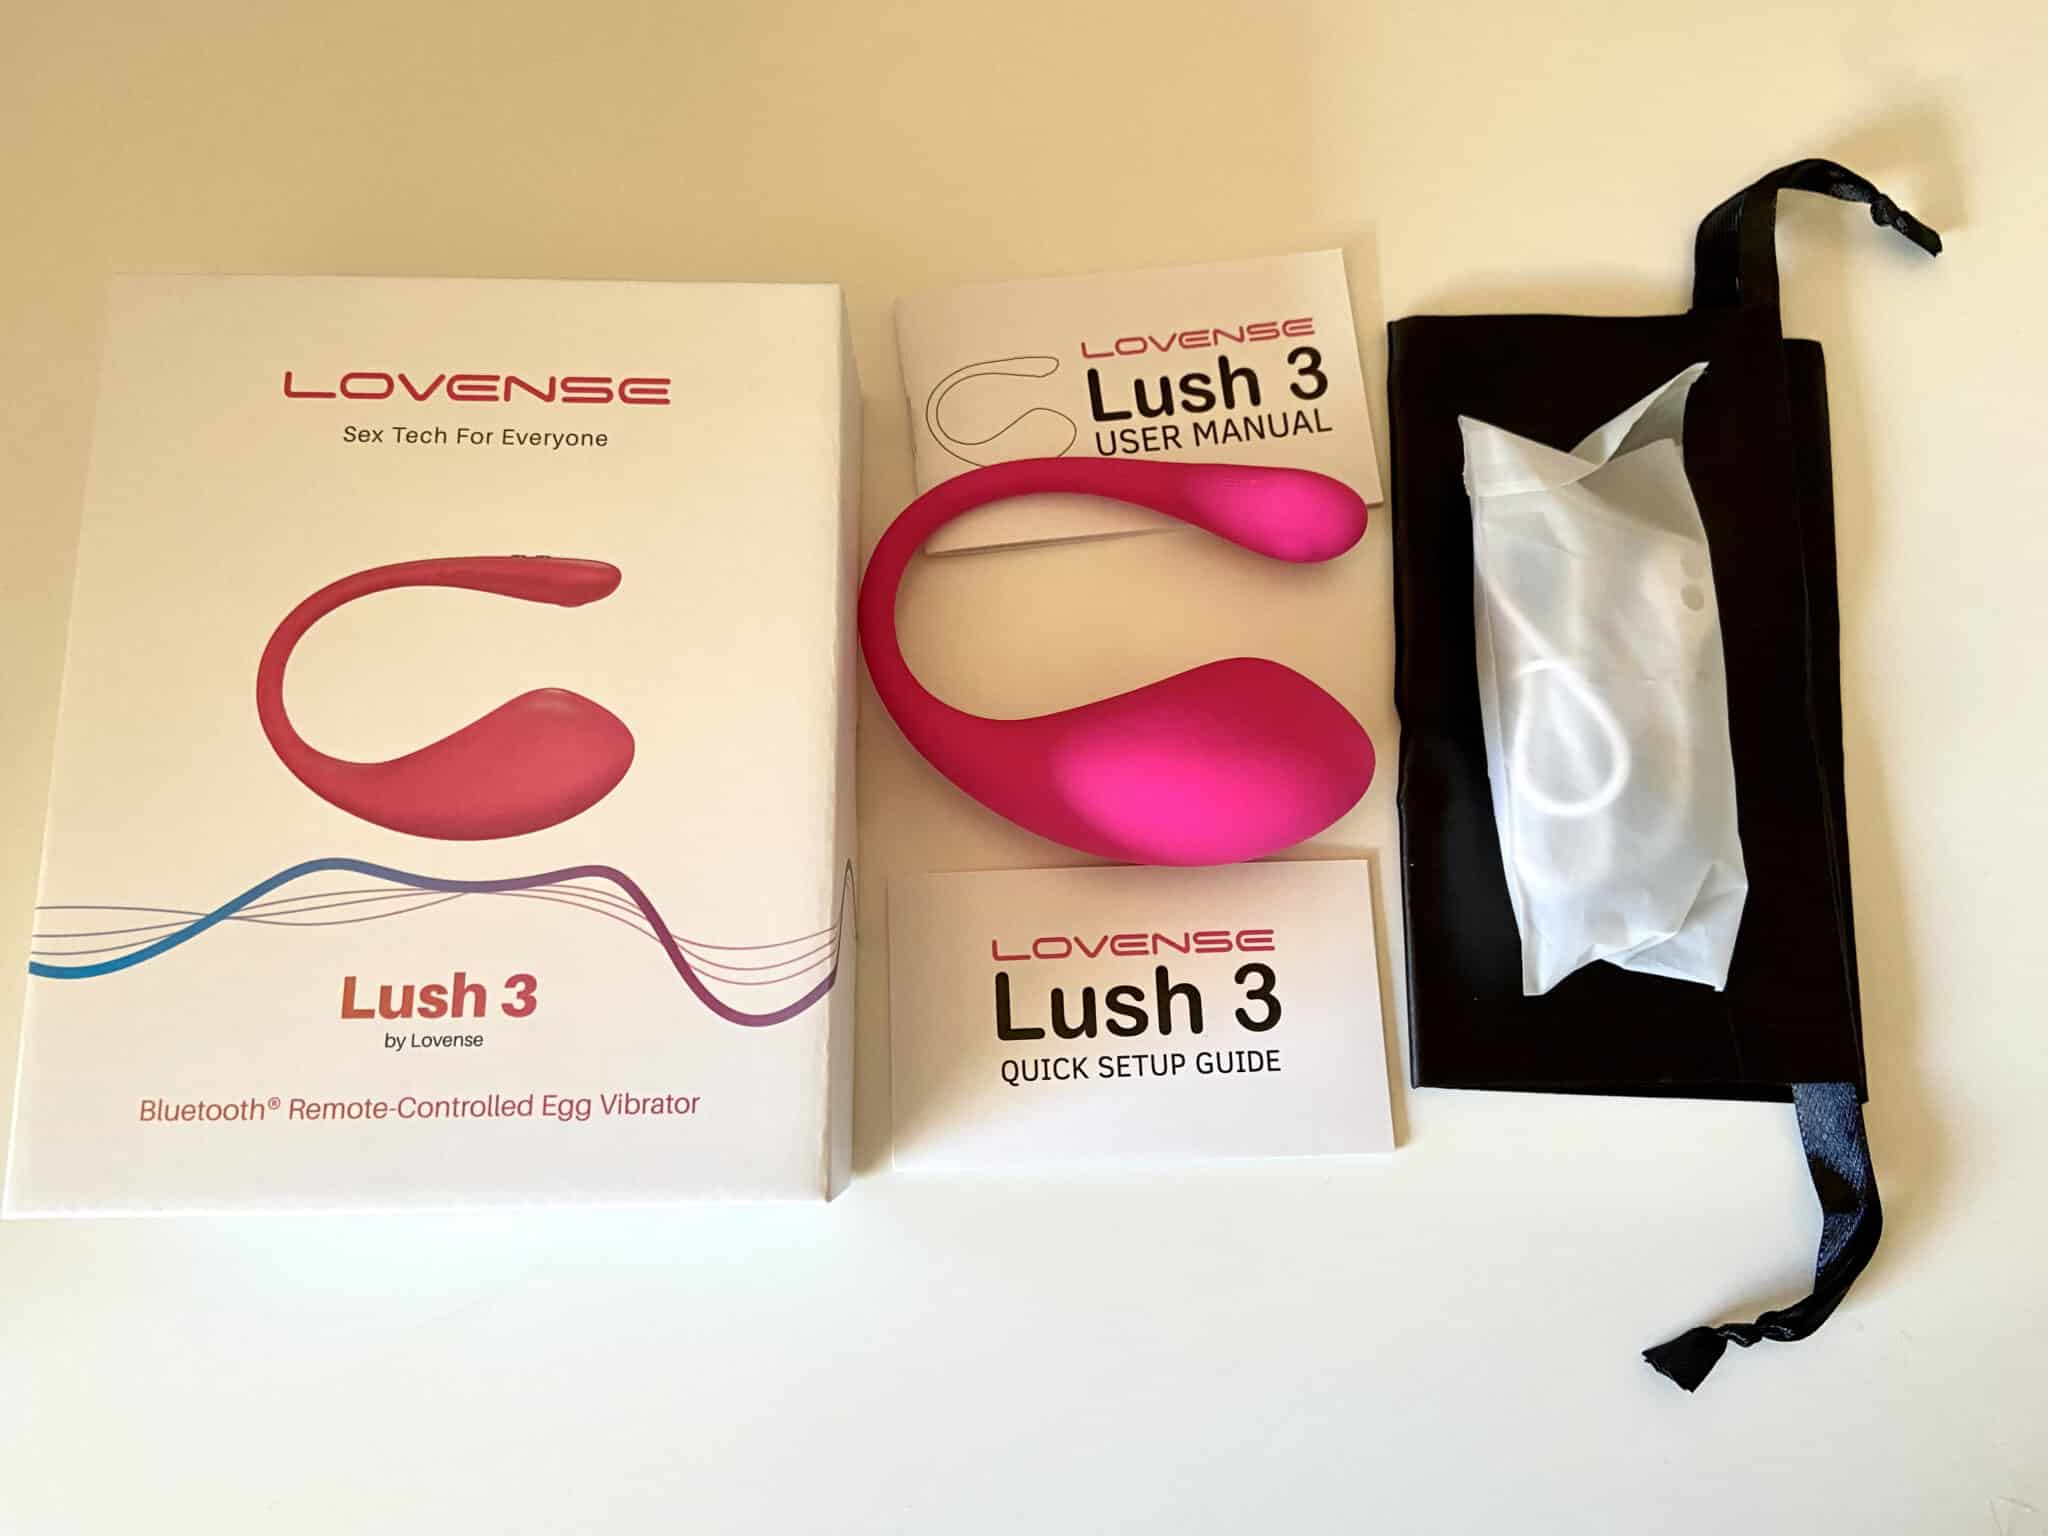 Lovense Lush 3 The Price Point of Lovense Lush 3: A Review